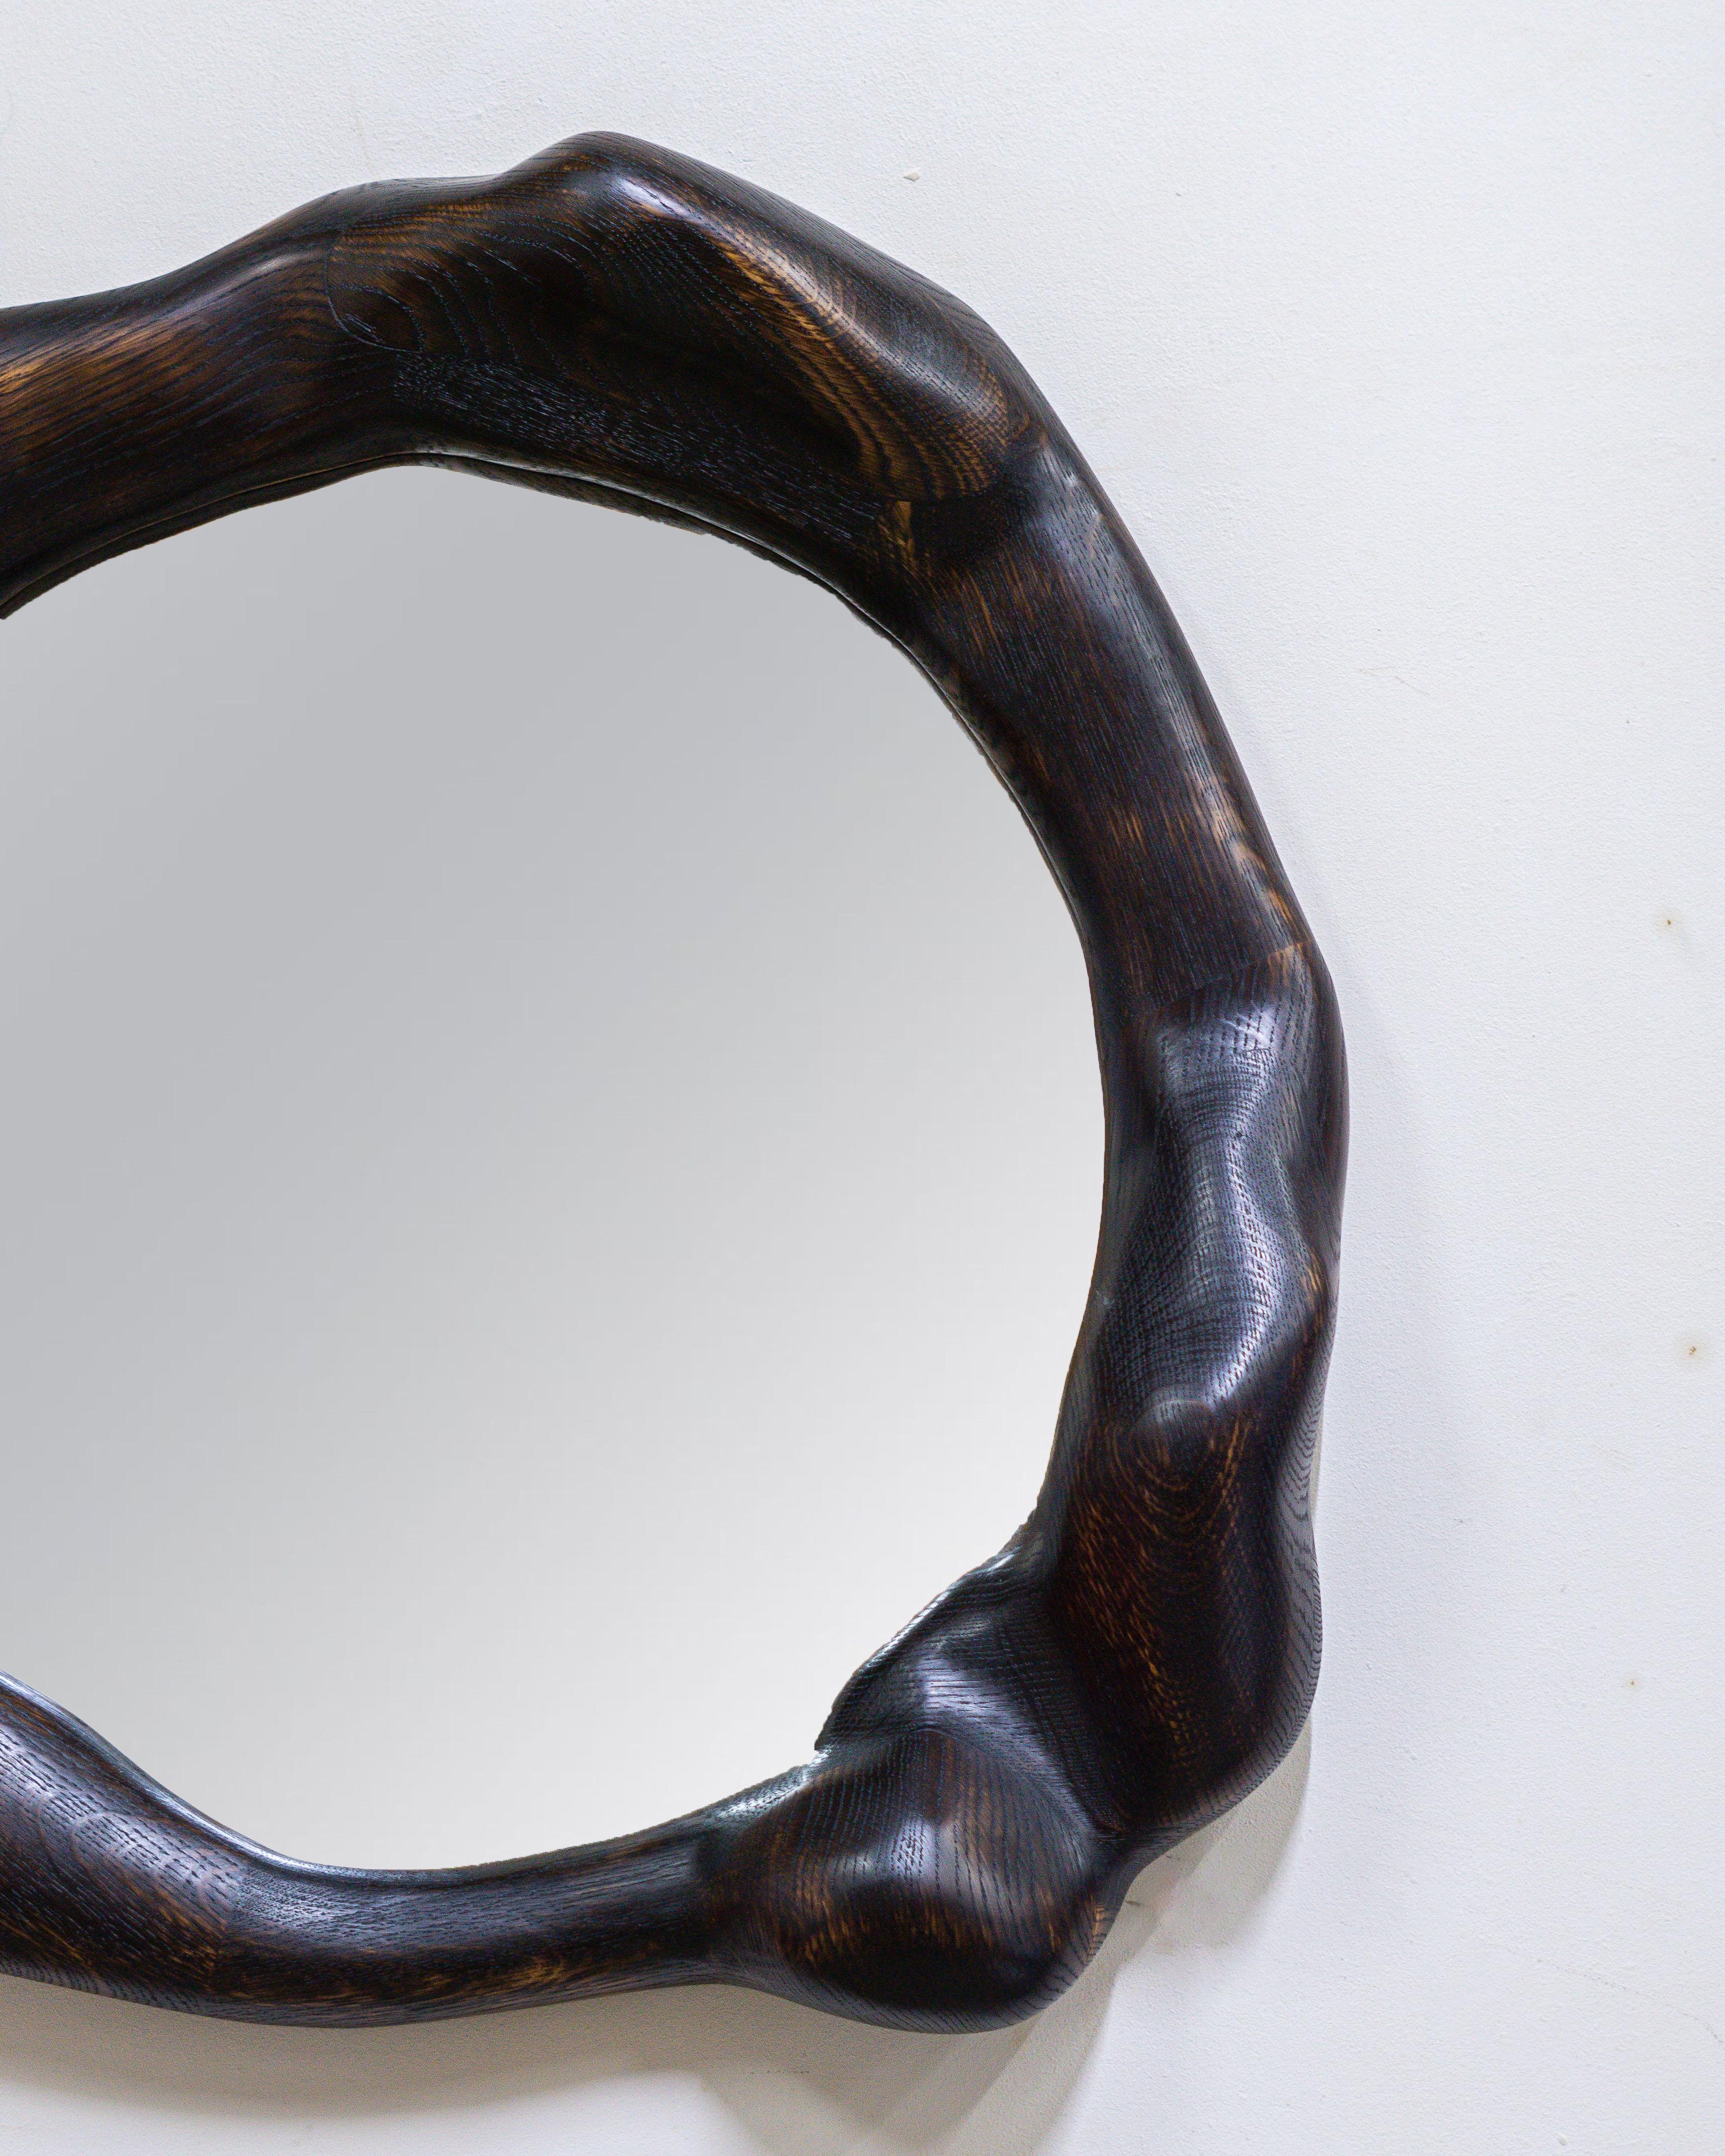 The frame of the mirror is shaped using various hand tools, making each piece unique with its own distinctive wood grain. The mirror is made from high-quality oak, which is lightly burned and finished with a hardwax oil.

The mirror is mounted on